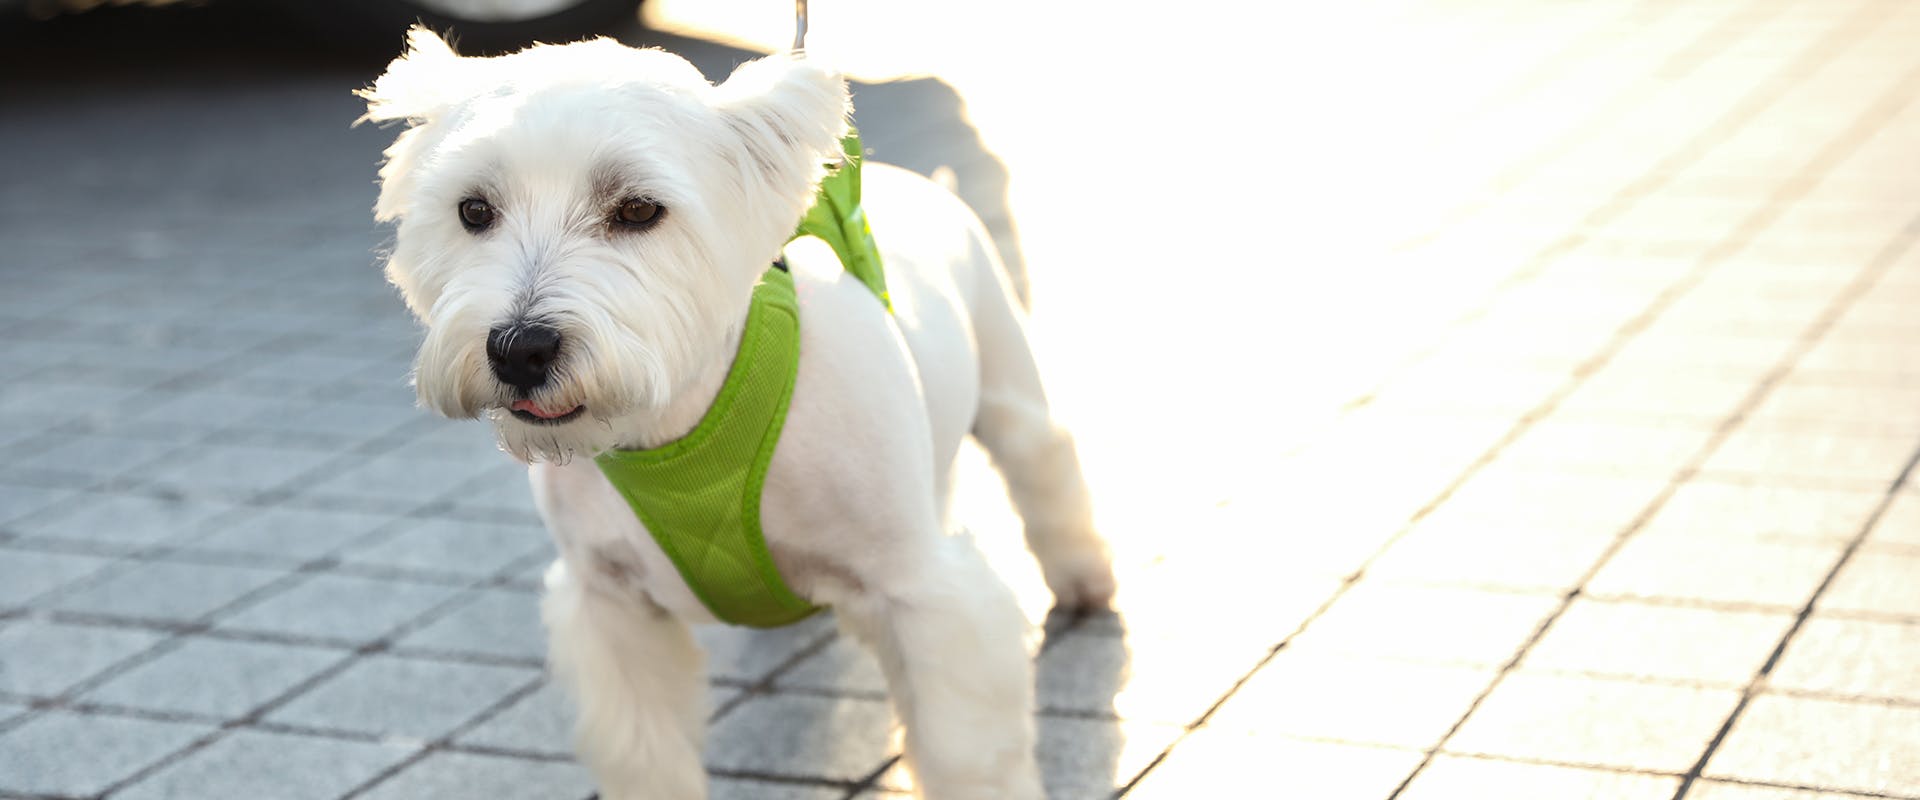 A small white dog walking on a sidewalk, wearing a bright green small dog harness